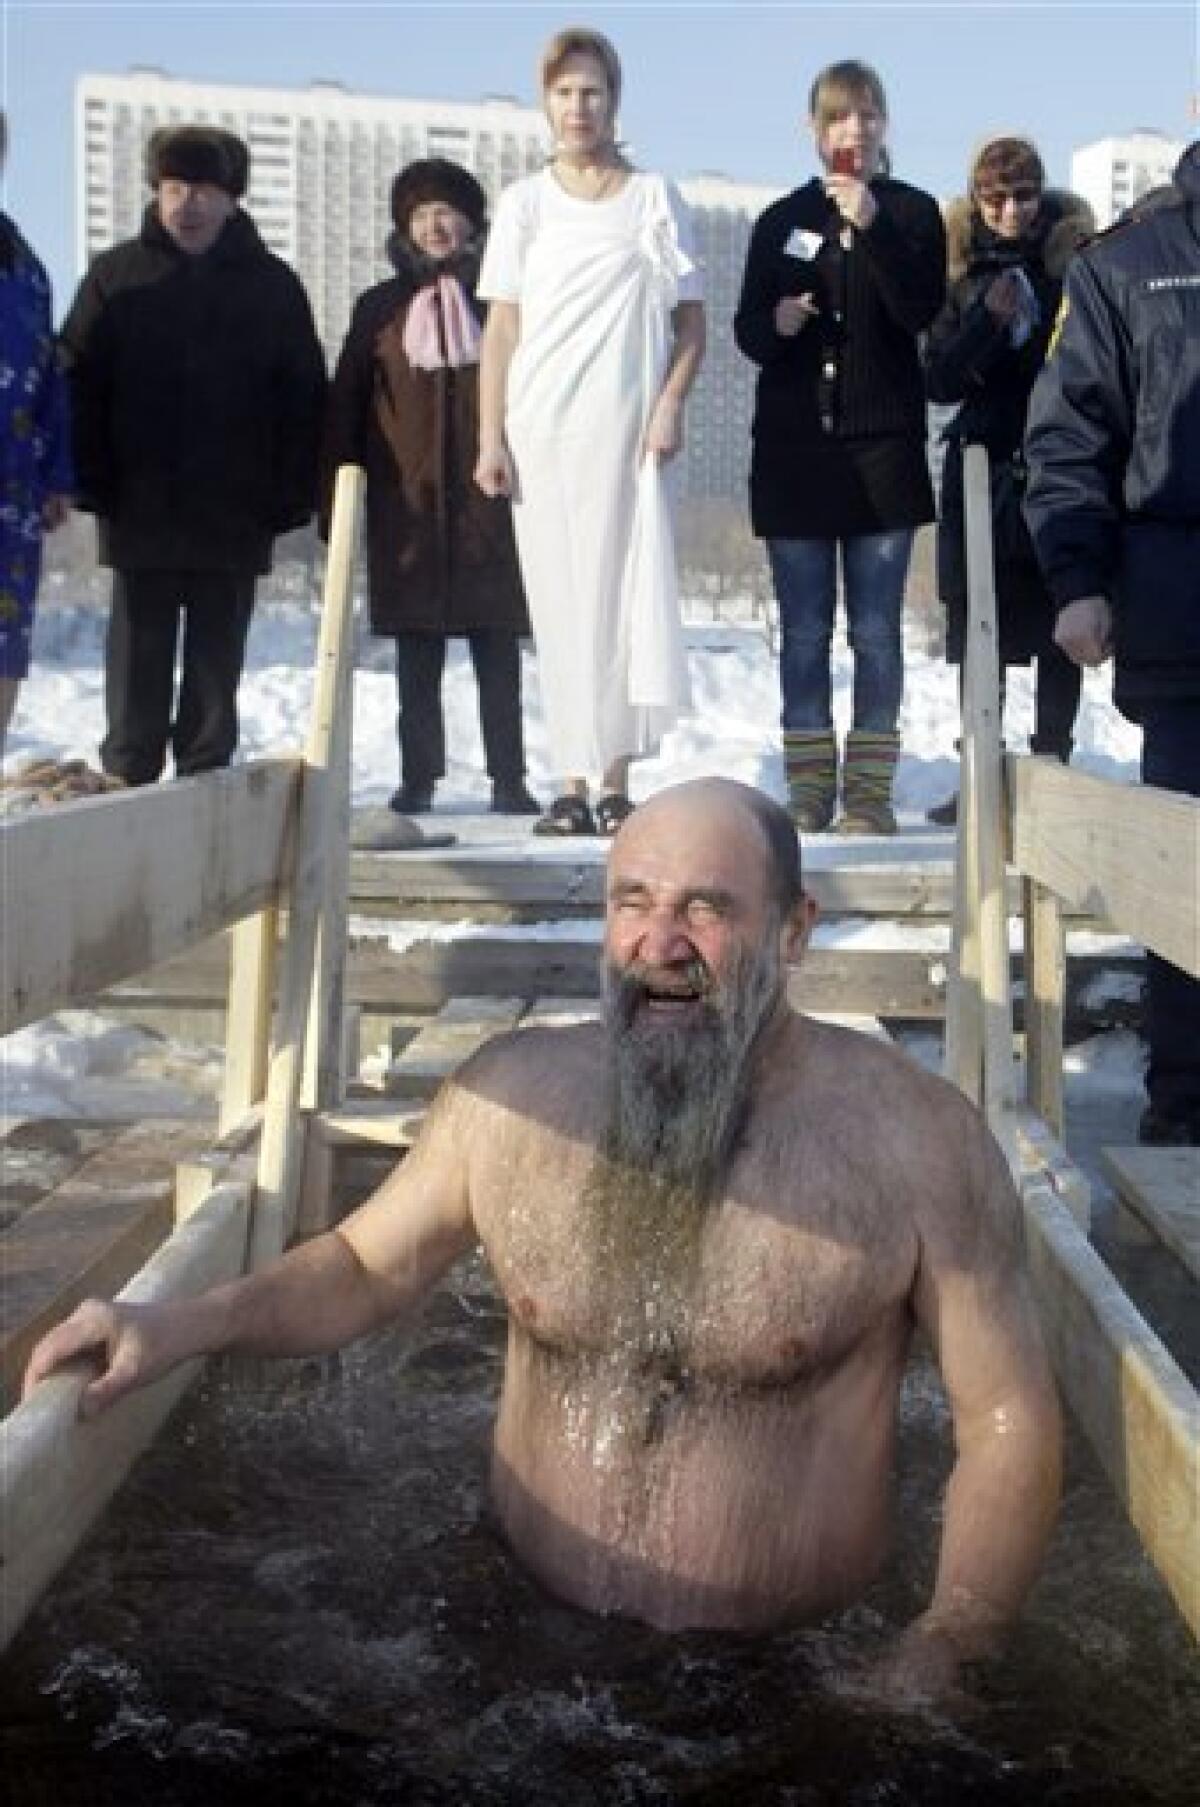 A man plunges into an icy pond to mark the upcoming Epiphany in the northwestern Moscow, Monday, Jan. 18, 2010. Thousands of Russian Orthodox Church followers plunged Monday into icy rivers and ponds across the country to mark the upcoming Epiphany, cleansing themselves with water deemed holy for the day. Water that is blessed by a cleric on Epiphany is considered holy and pure until next year's celebration, and is believed to have special powers of protection and healing. The Russian Orthodox Church follows the old Julian calendar, according to which Epiphany falls on Jan. 19. Moscow temperatures on Monday morning dropped to -20 C (-4 F). (AP Photo/Mikhail Metzel) — AP